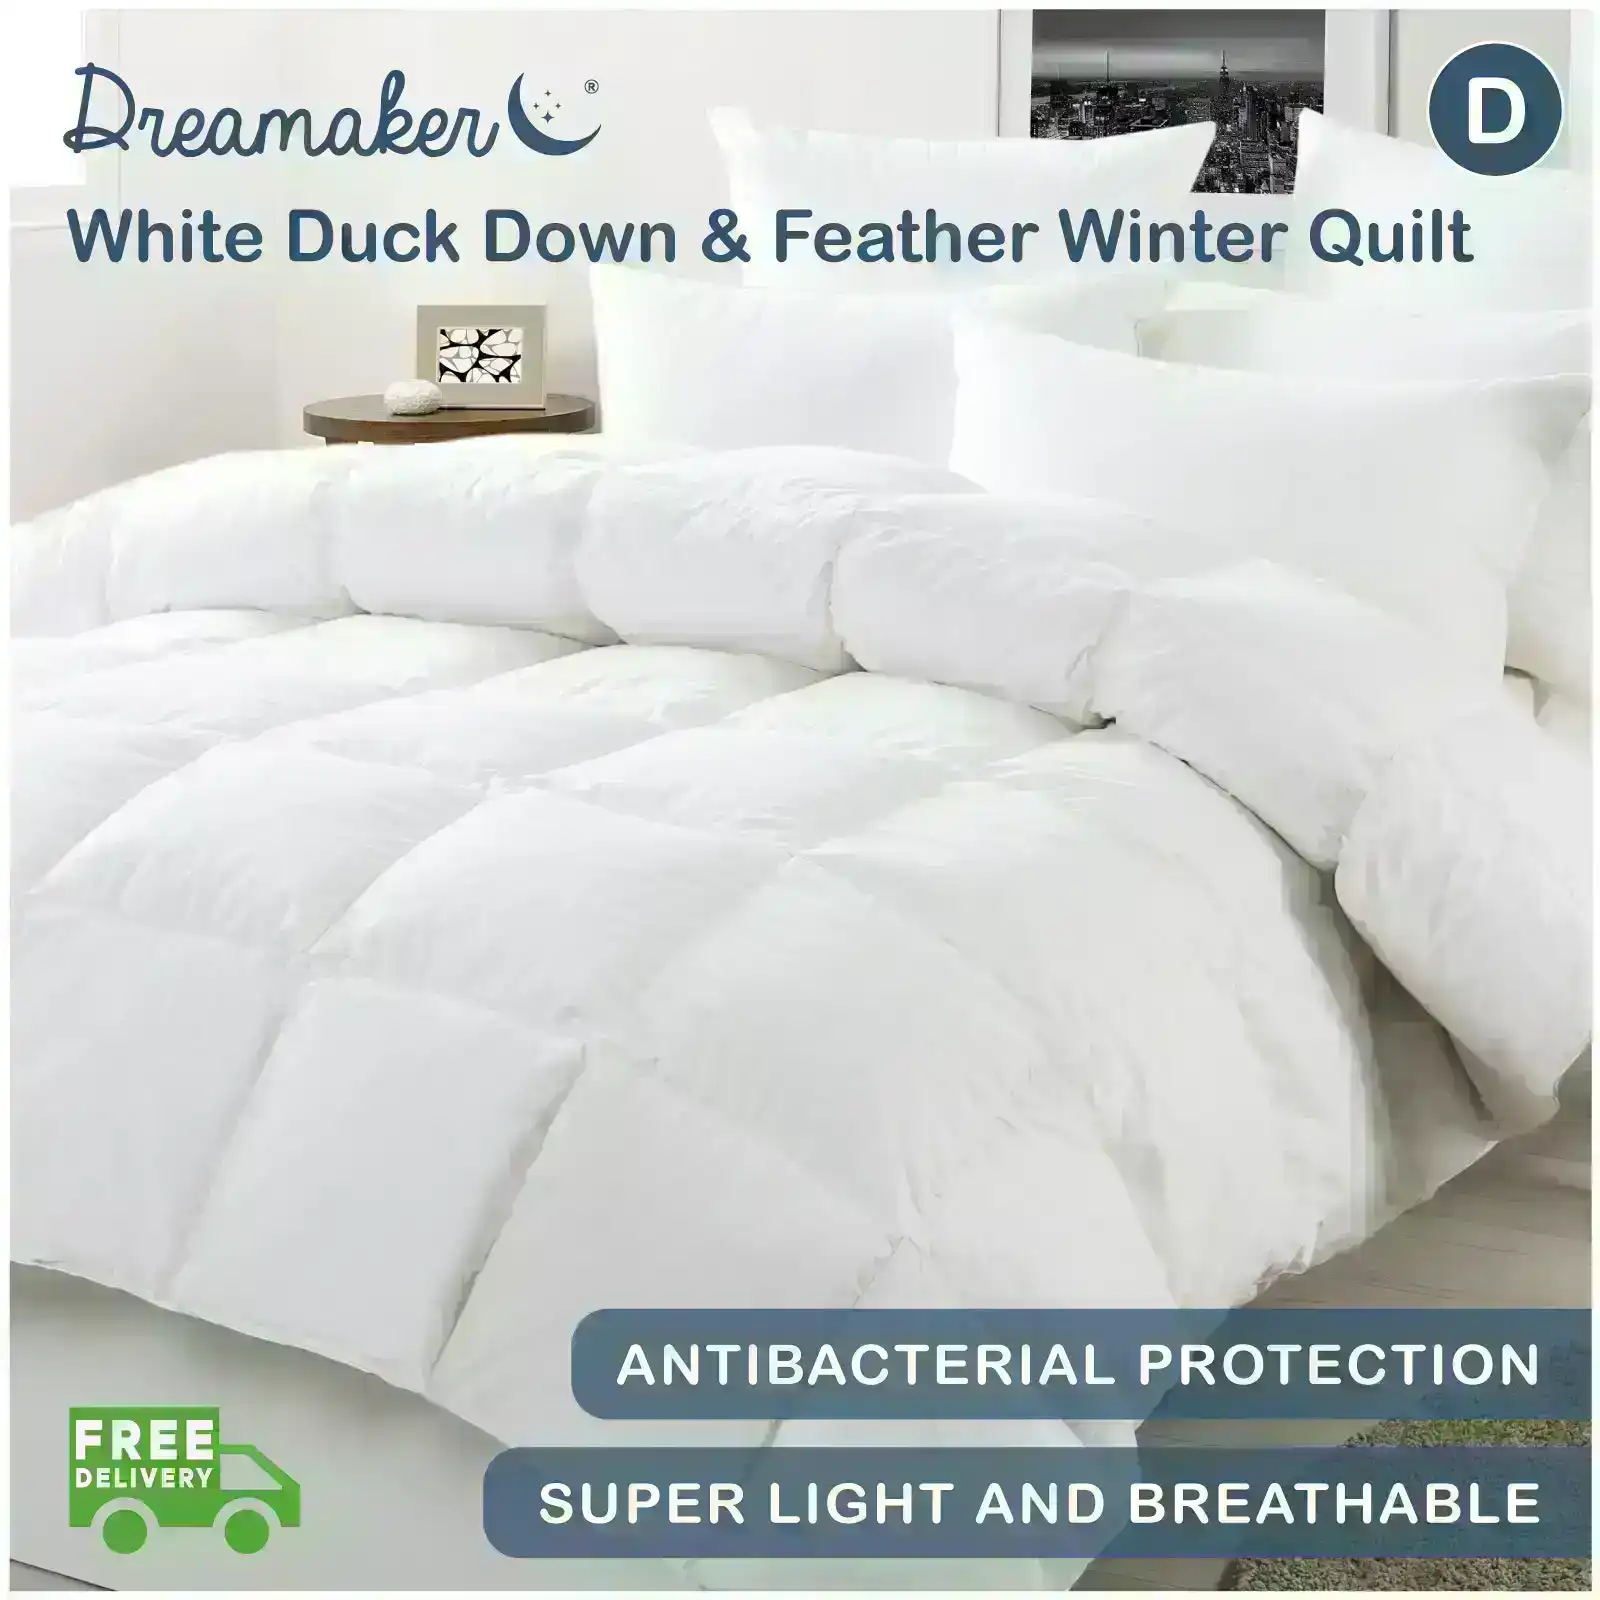 Dreamaker 50/50 White Duck Down & Feather Winterweight Quilt - Double Bed